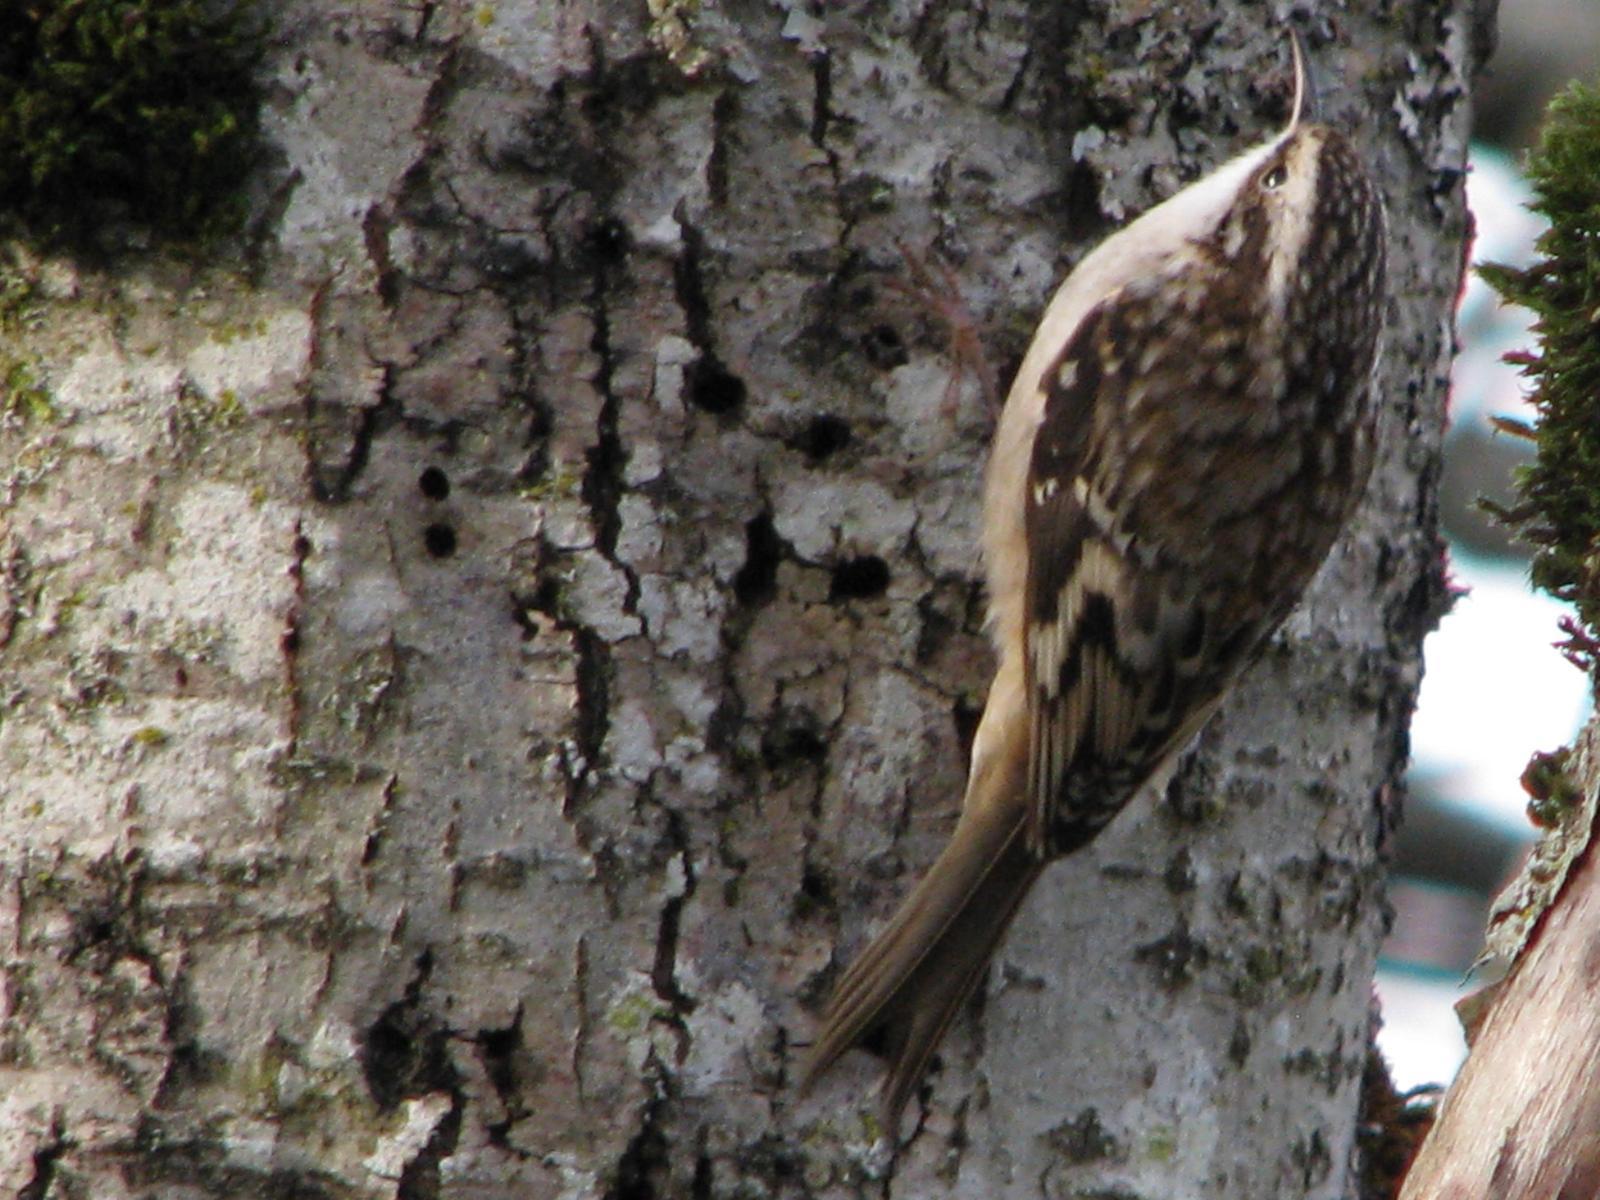 Brown Creeper (occidentalis Group) Photo by Ted Goshulak